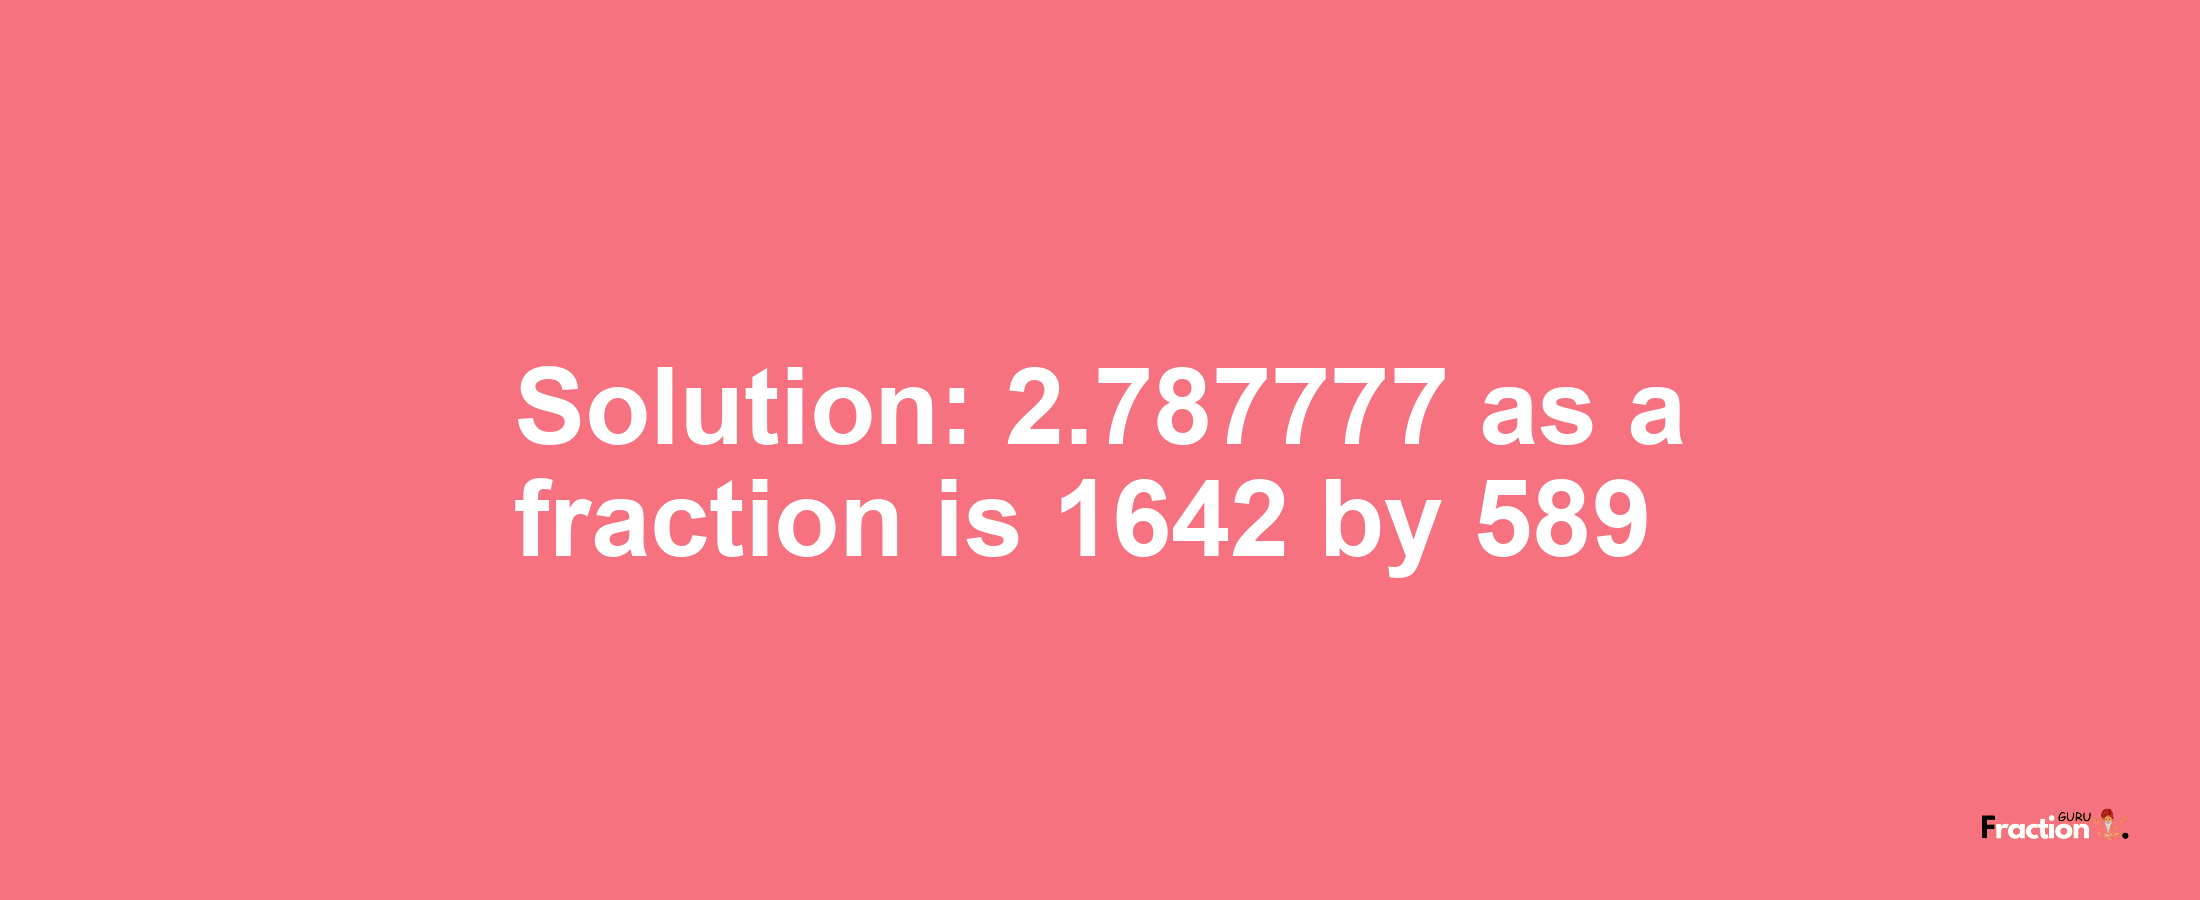 Solution:2.787777 as a fraction is 1642/589